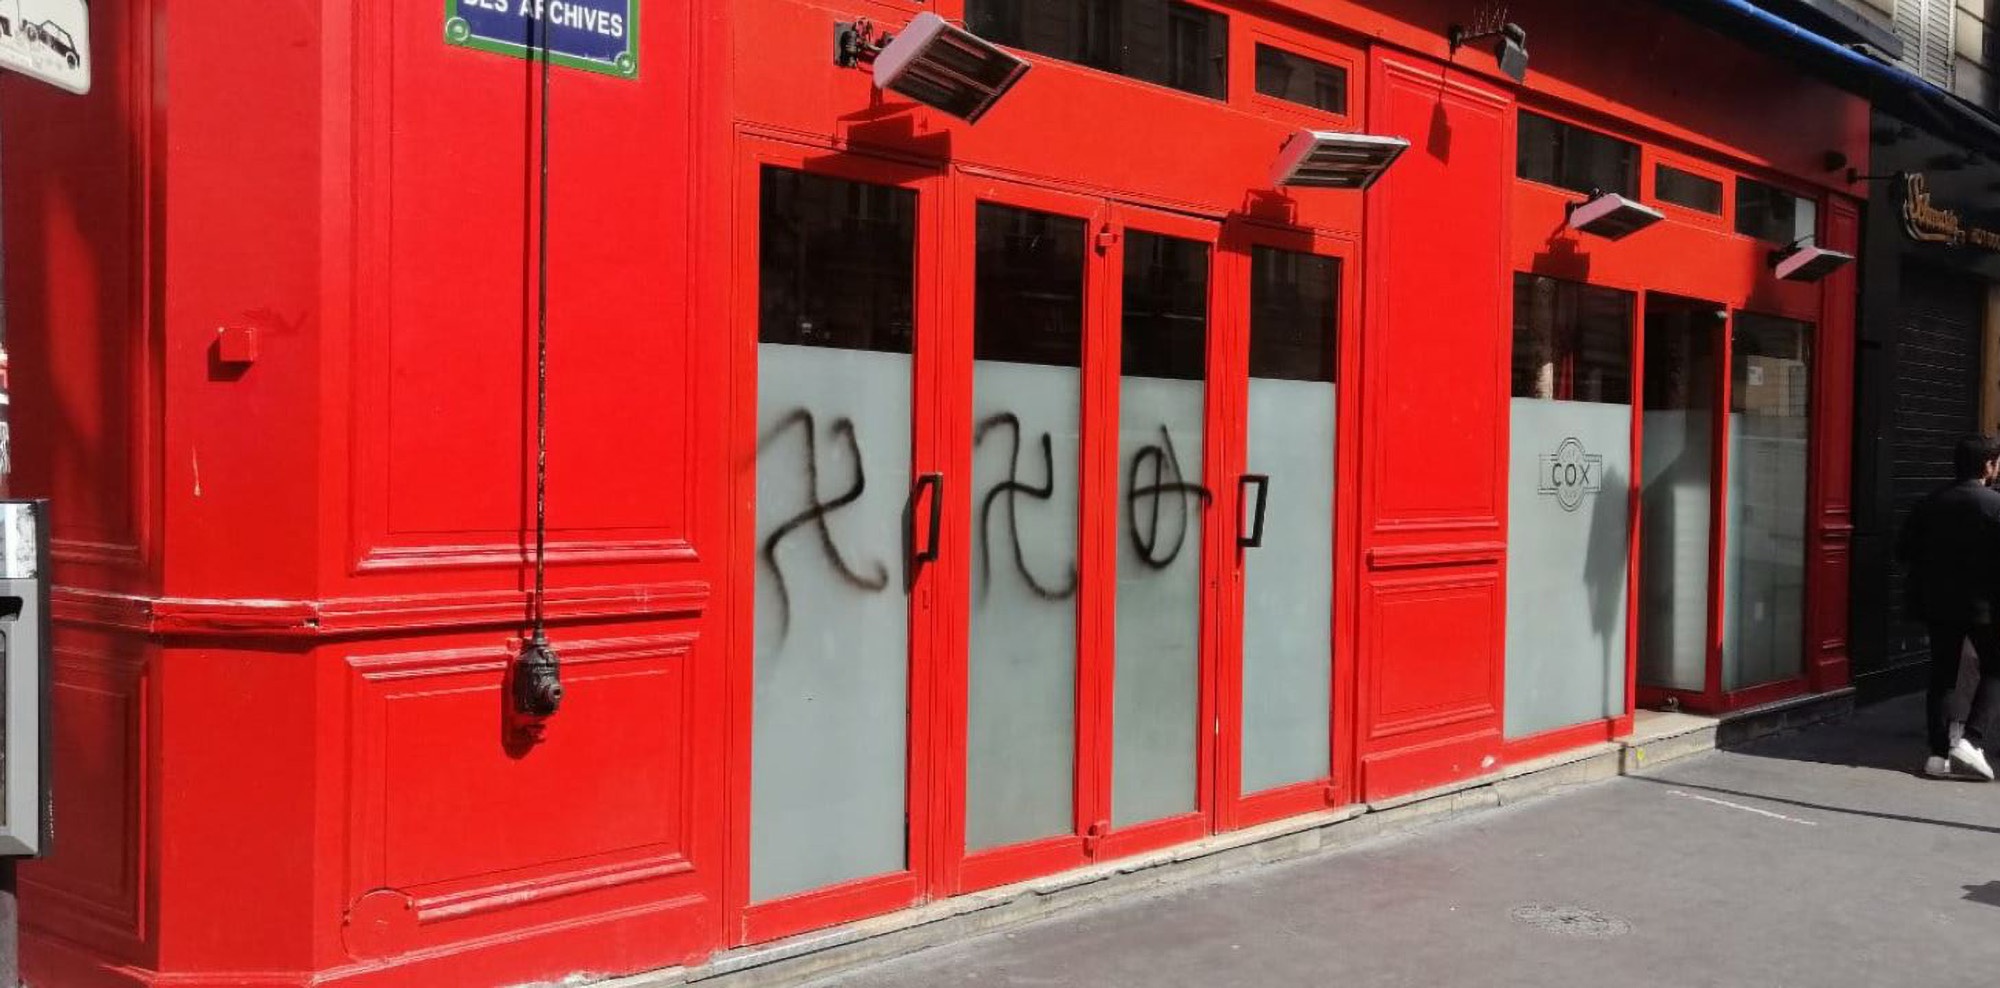 Read more about the article Swastika Graffiti On Gay Bars In Paris In Hate Attacks